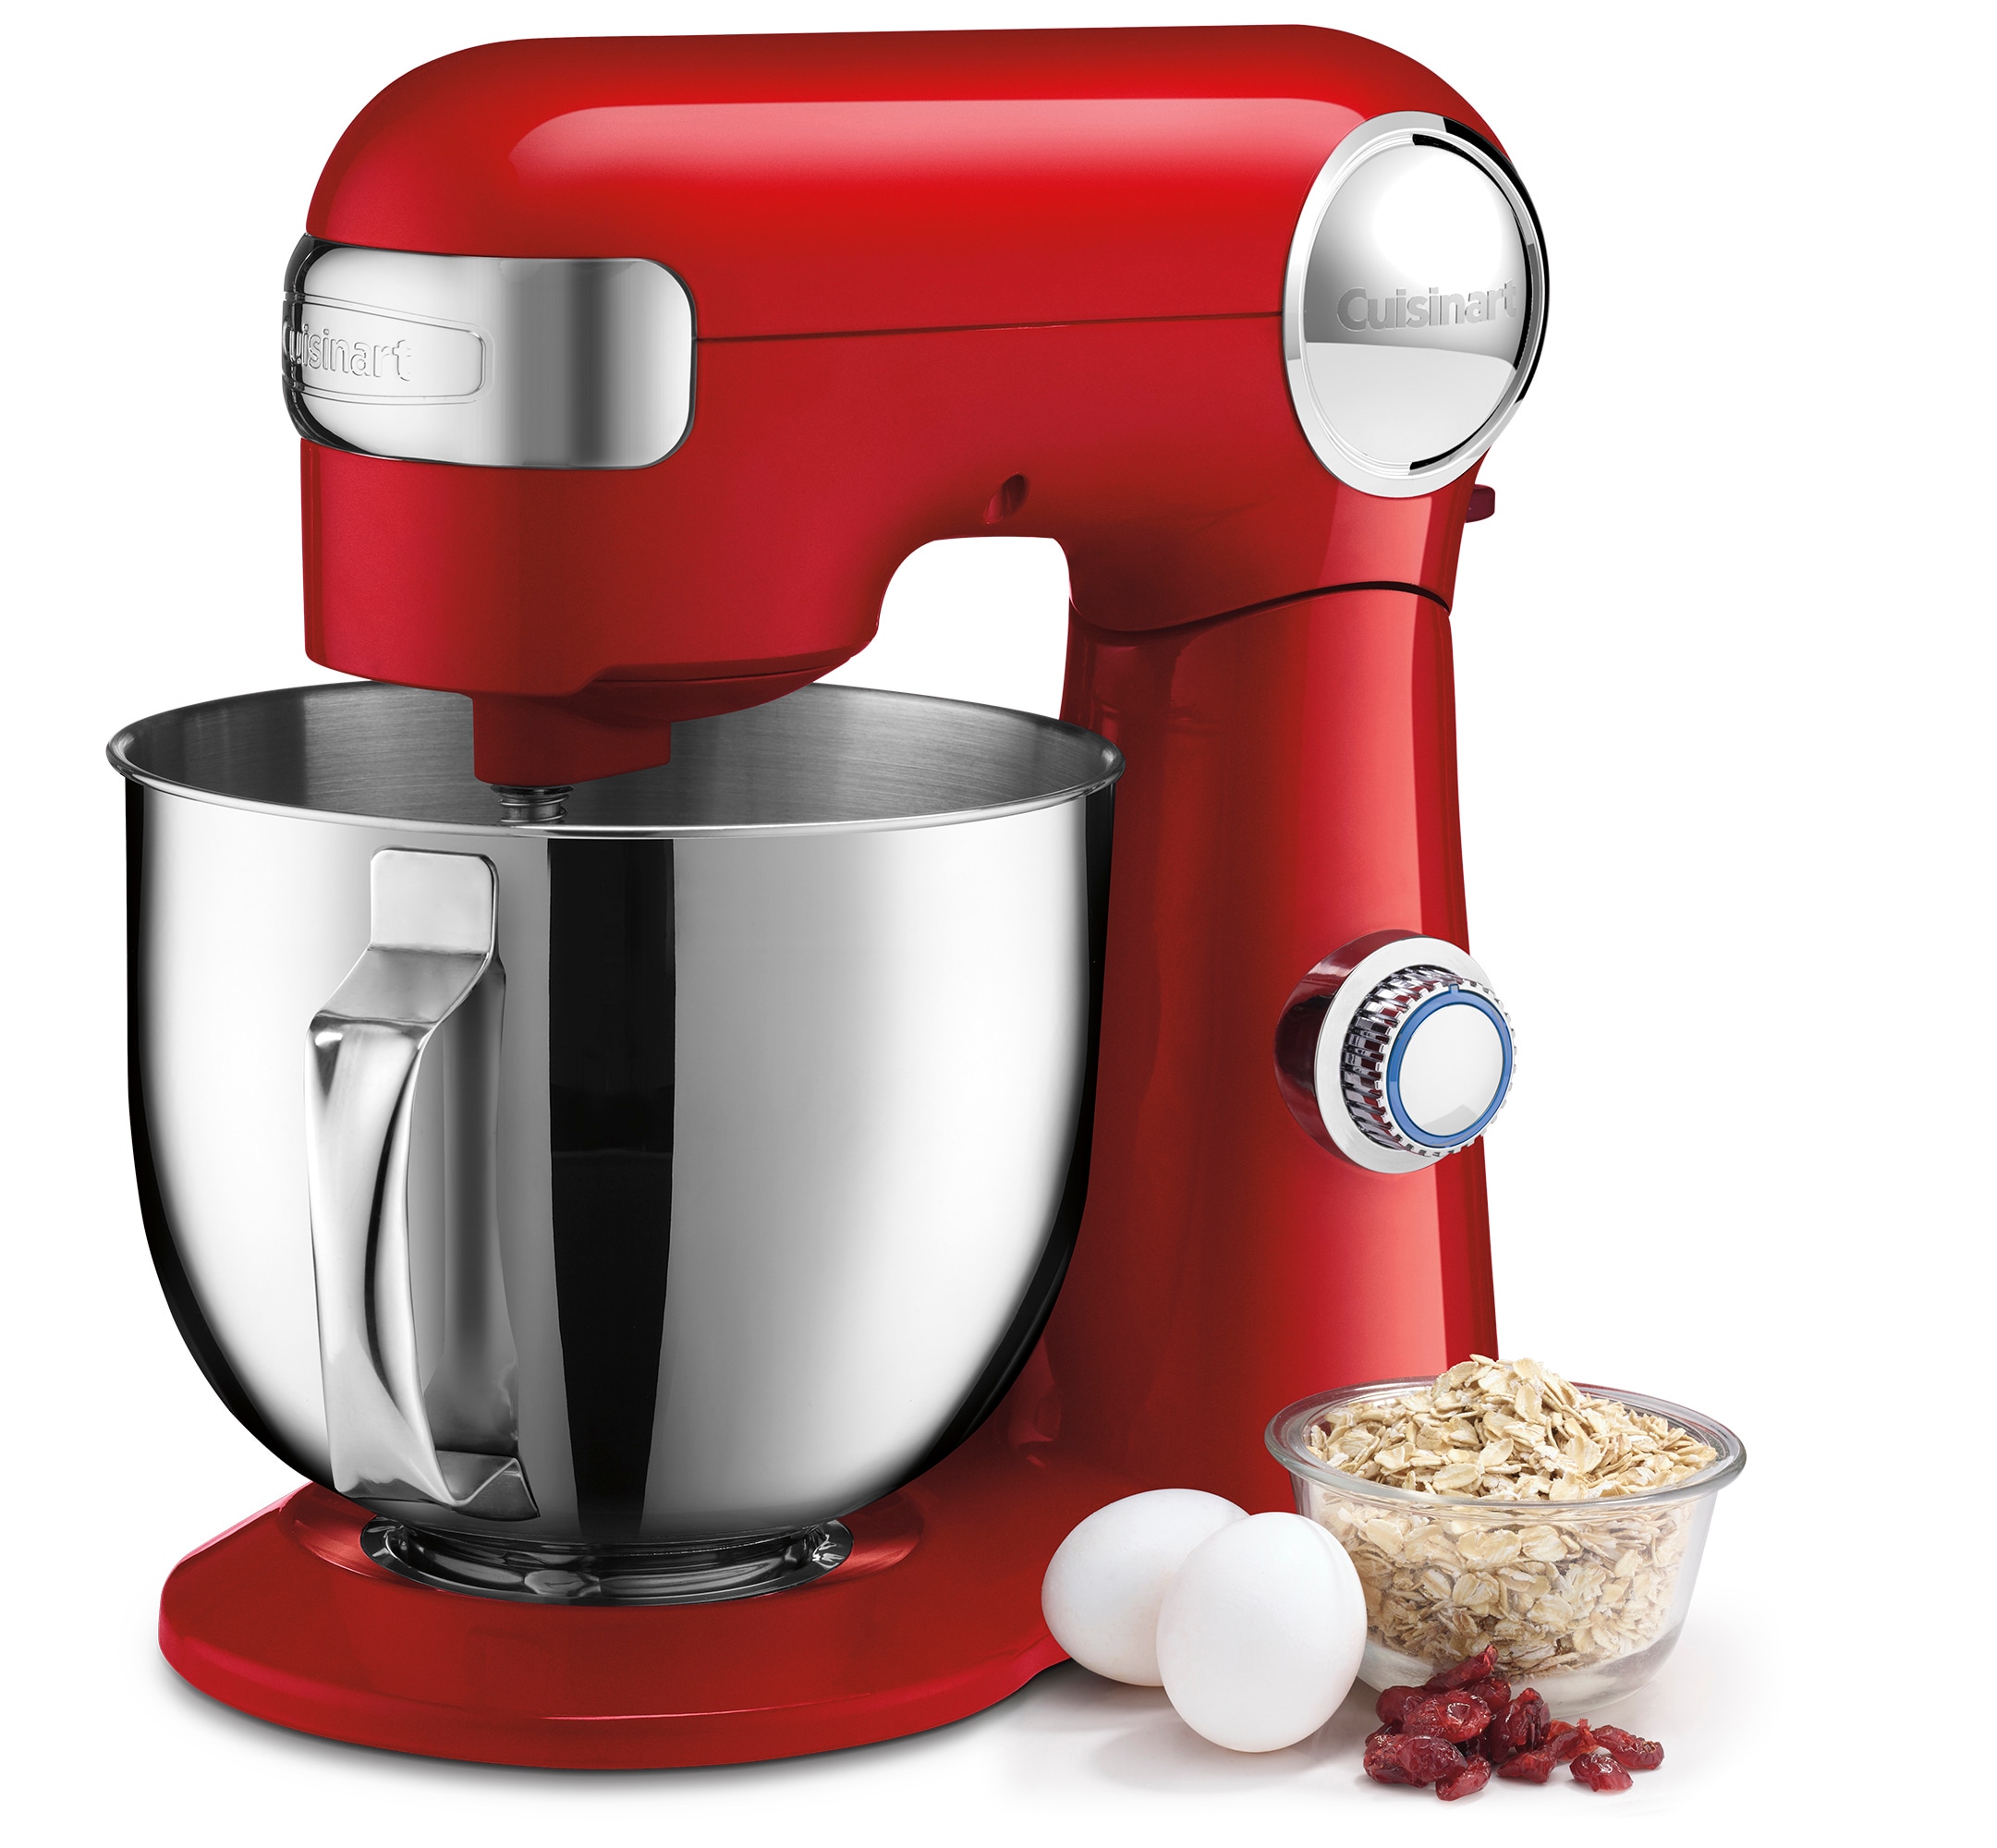 Cuisinart 5.5-Quart 12-Speed Red Residential Stand Mixer in the